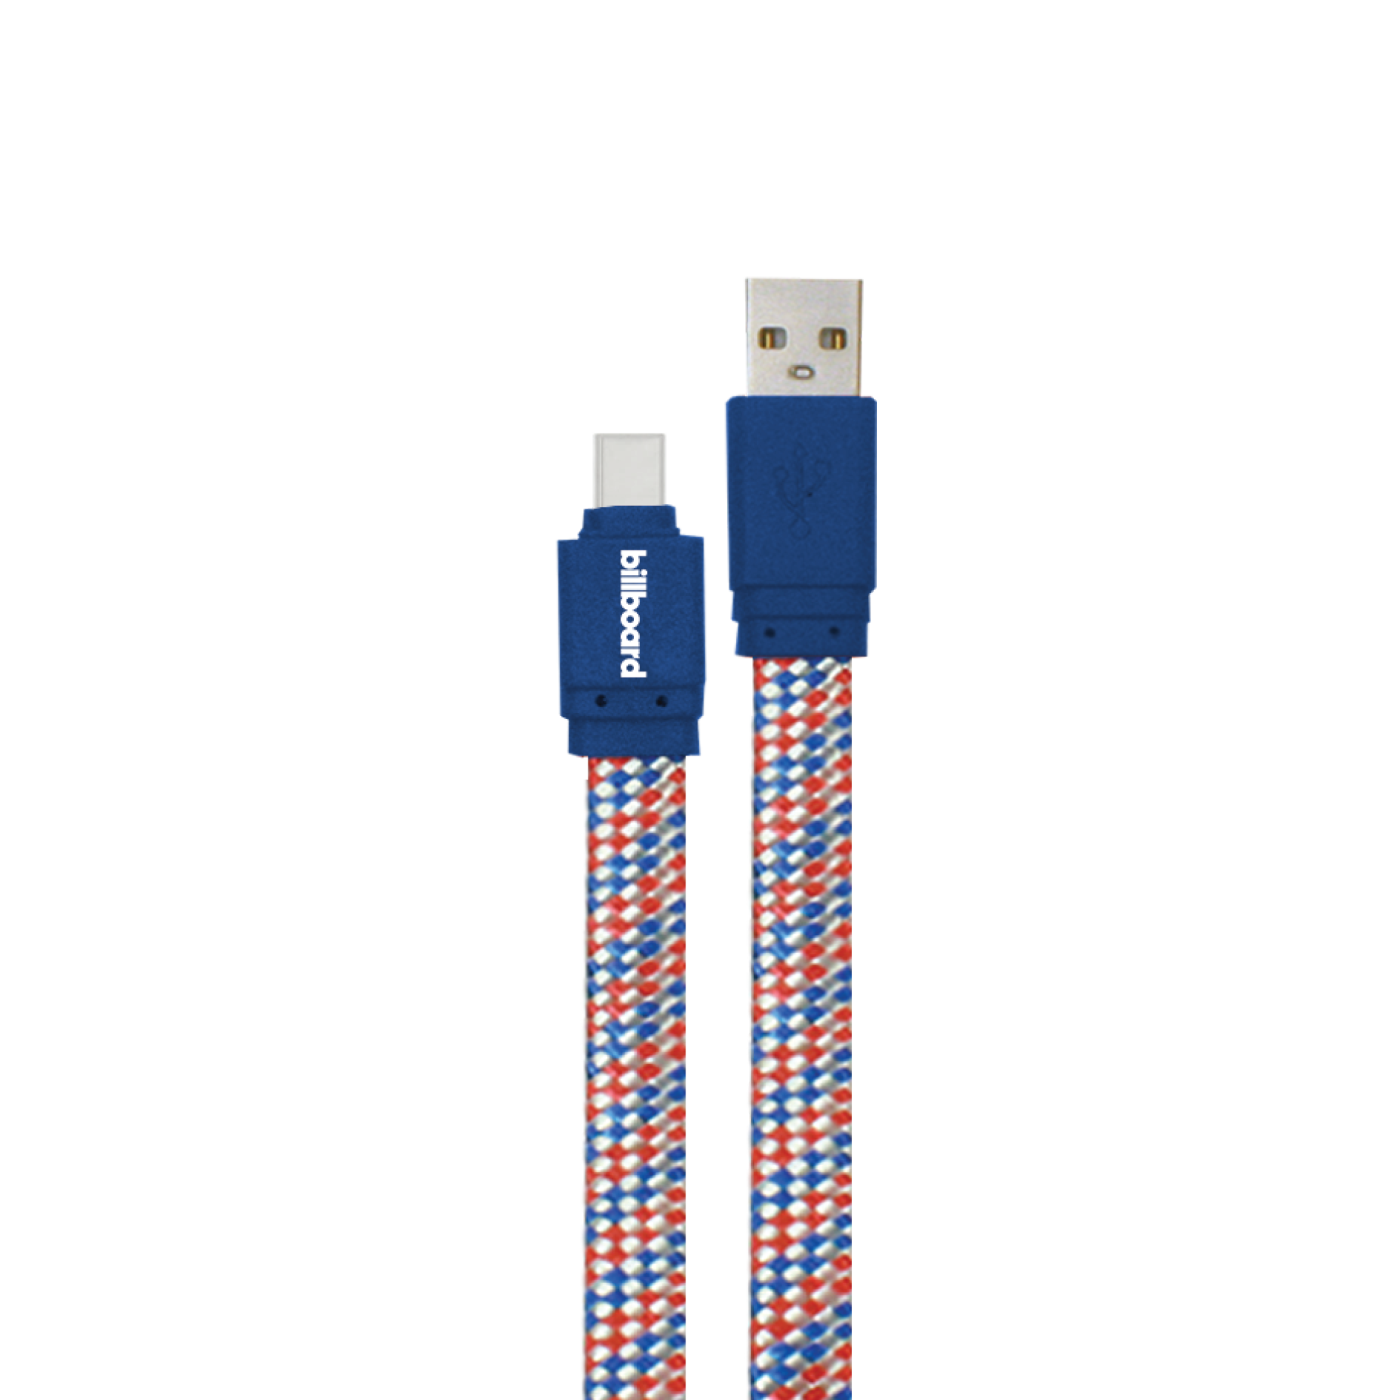 Cable Sync & Charge USB-C to USB-A 6' Blue Color